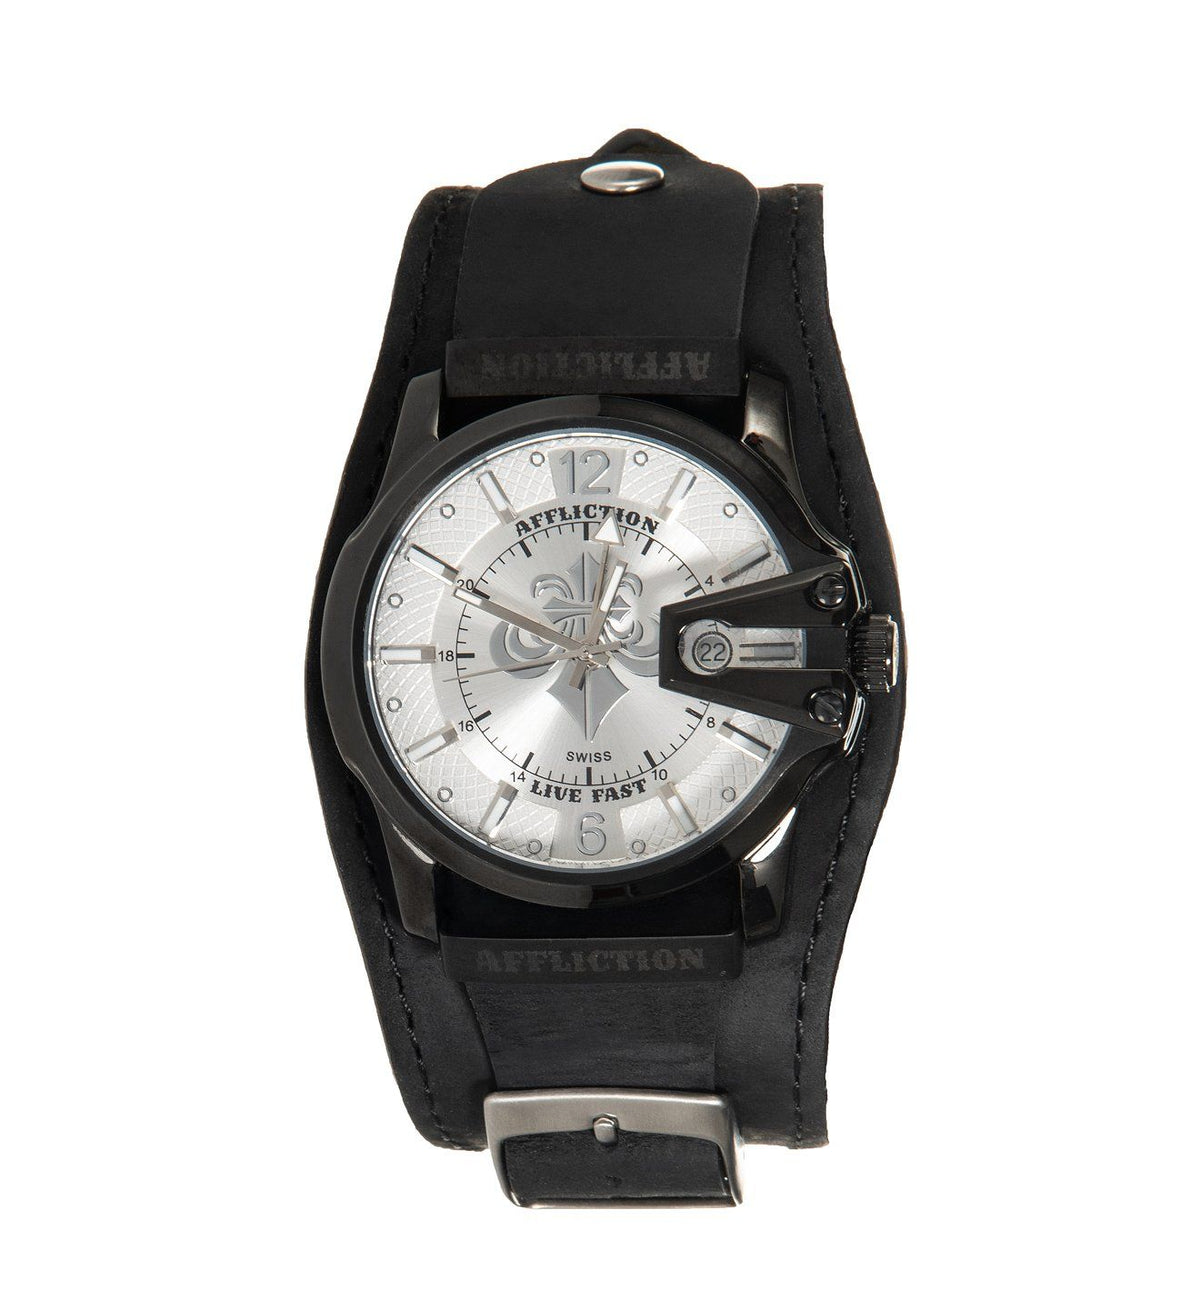 Duel X Watch - Affliction Clothing